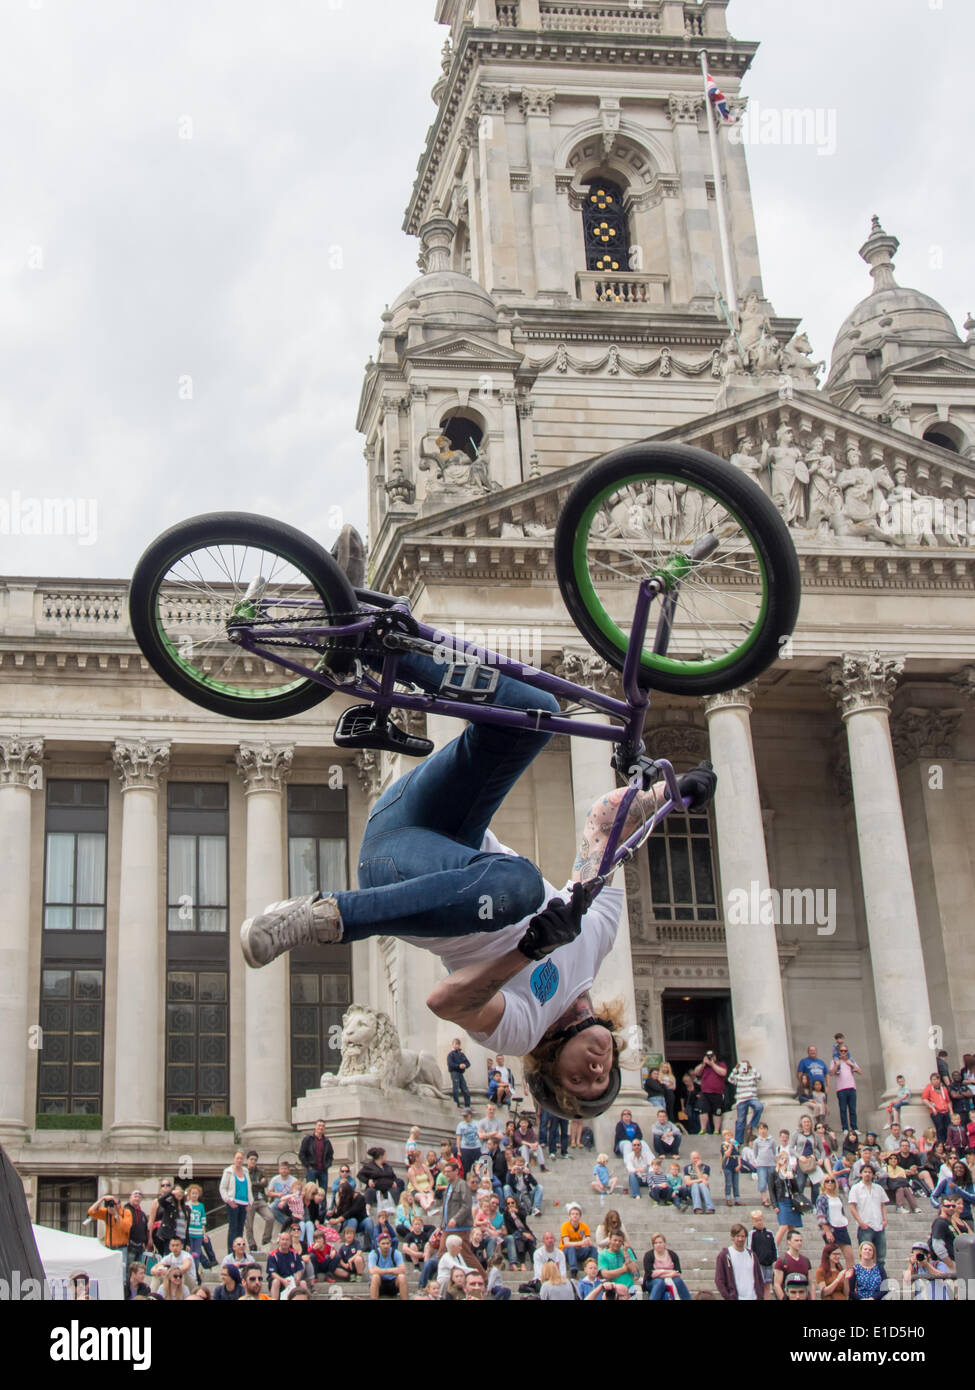 A BMX rider performs an aerial stunt in front of crowds gathered on the Portsmouth Guildhall steps, during the Portsmouth street games funded by the Portsmouth cultural trust Stock Photo